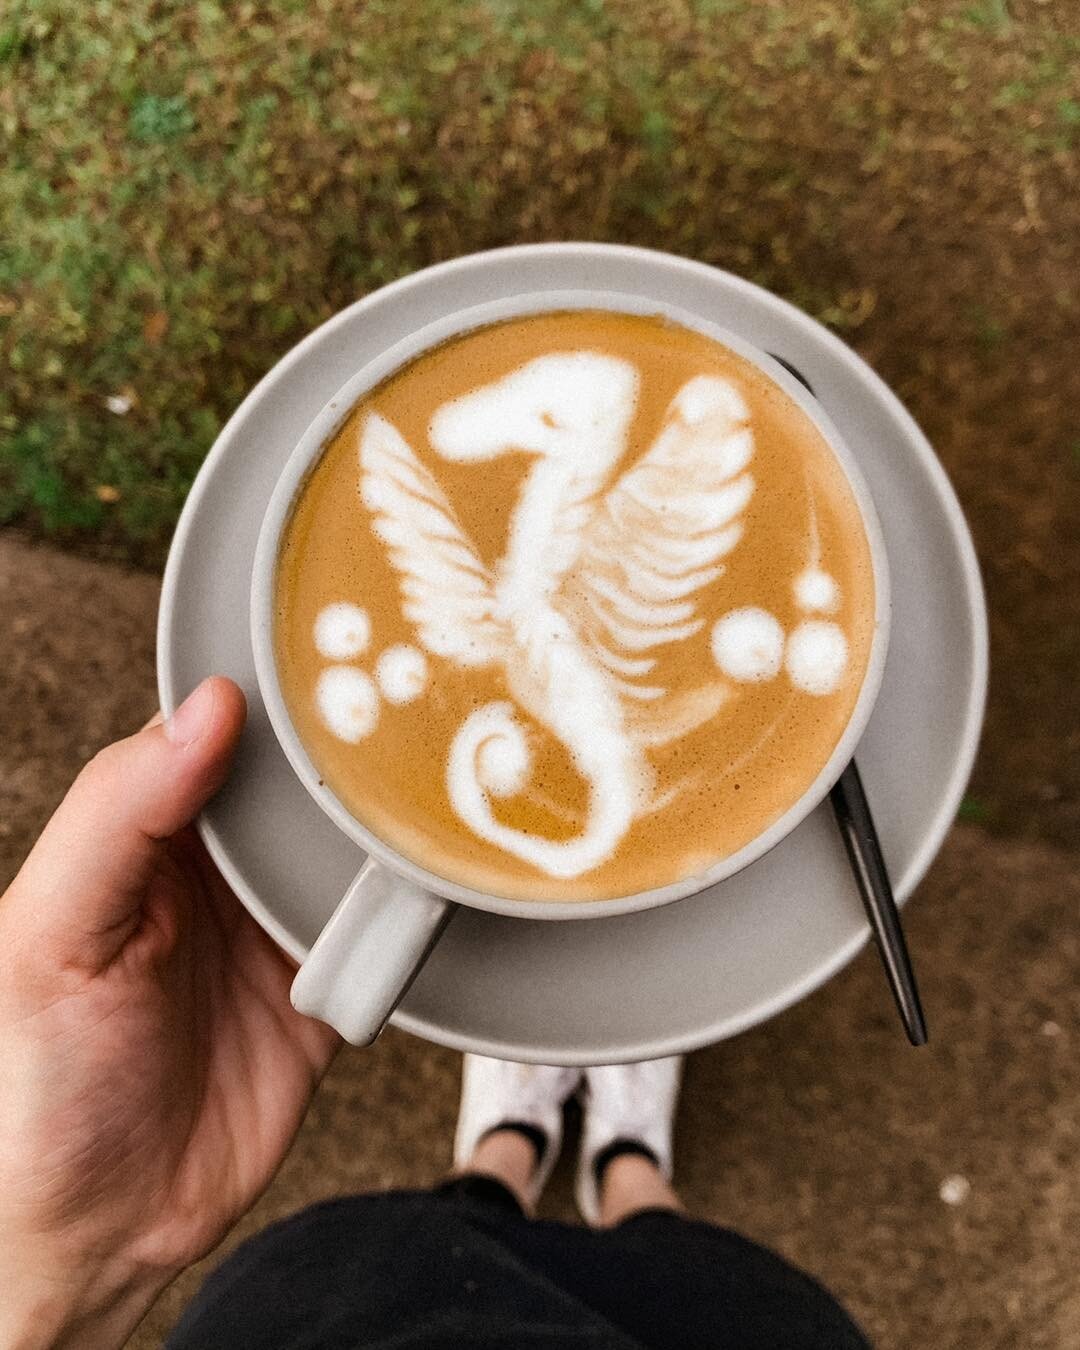 When art and passion meet coffee, you get latte art as beautiful as this. 😍😍